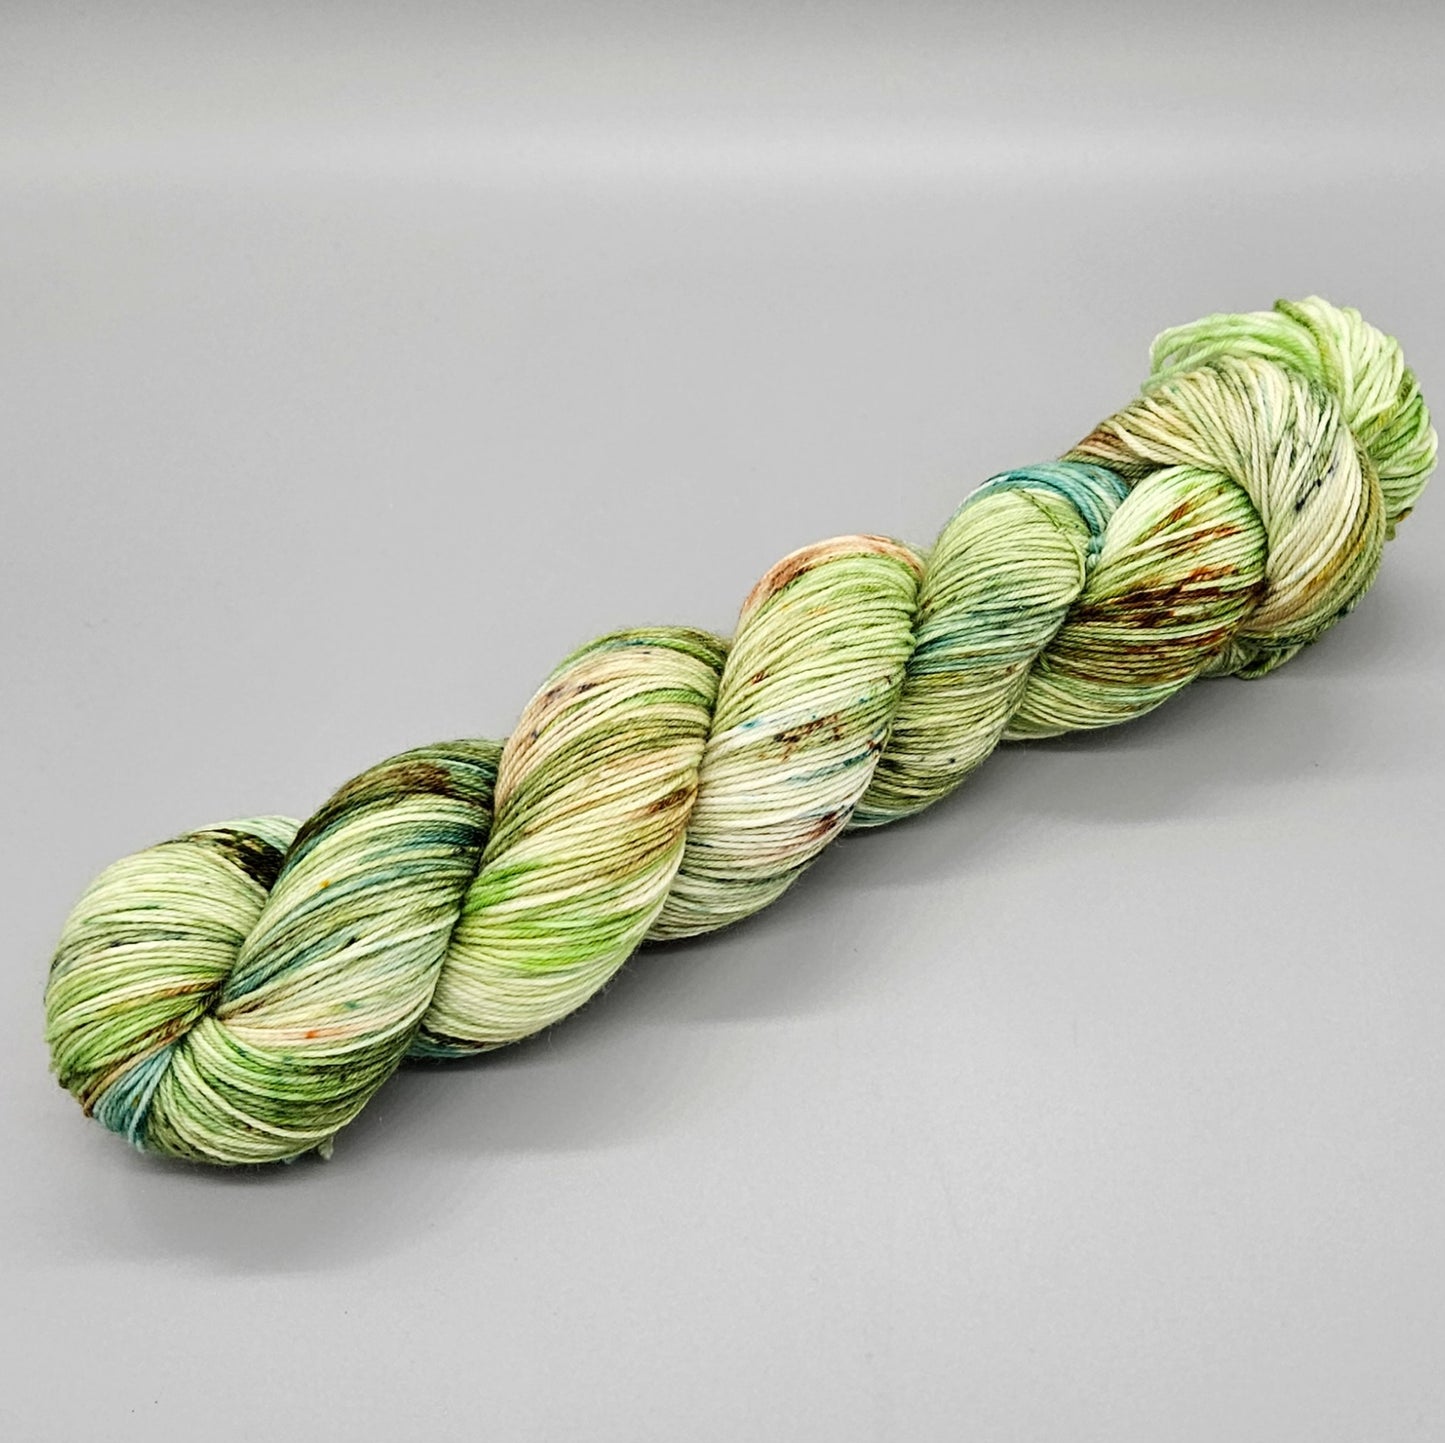 DYED TO ORDER - Treebeard